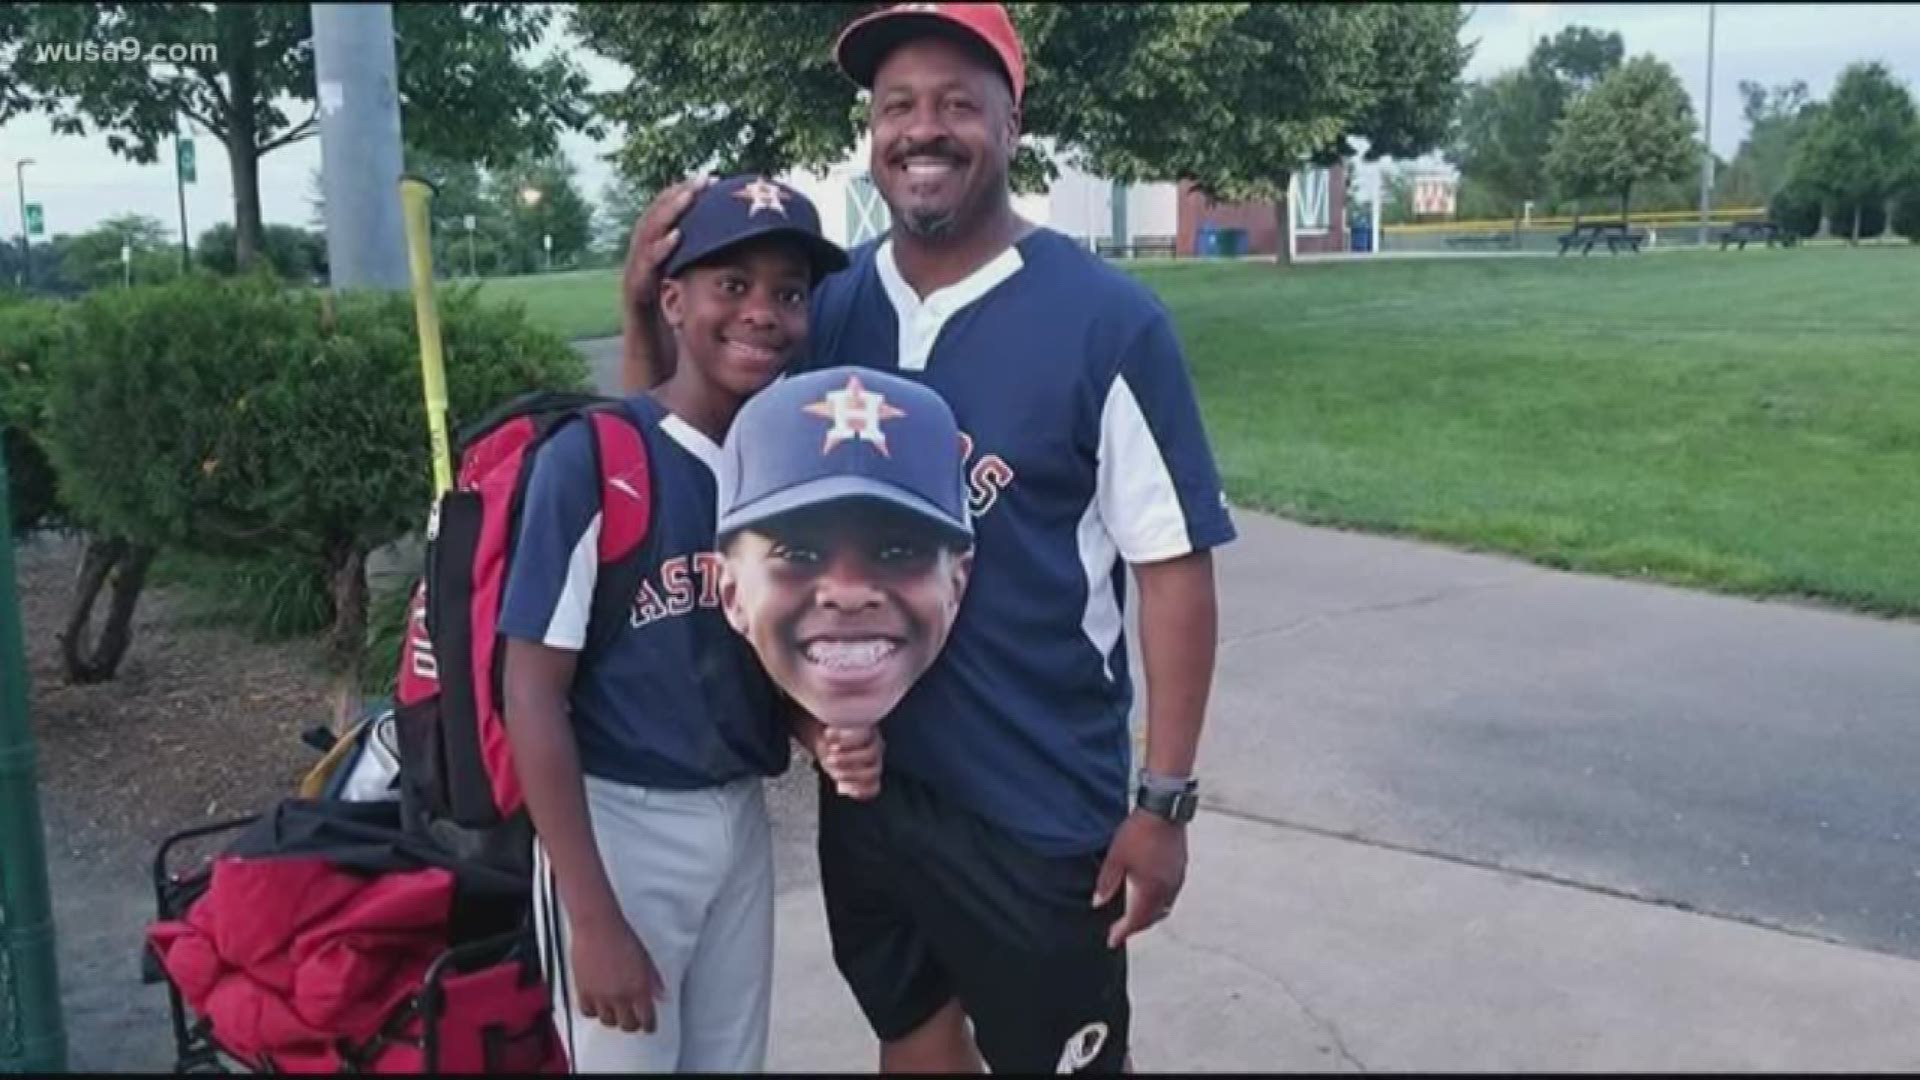 This D.C dad may be running for father of the year.  He surprised his 12-year-old son with World Series tickets!